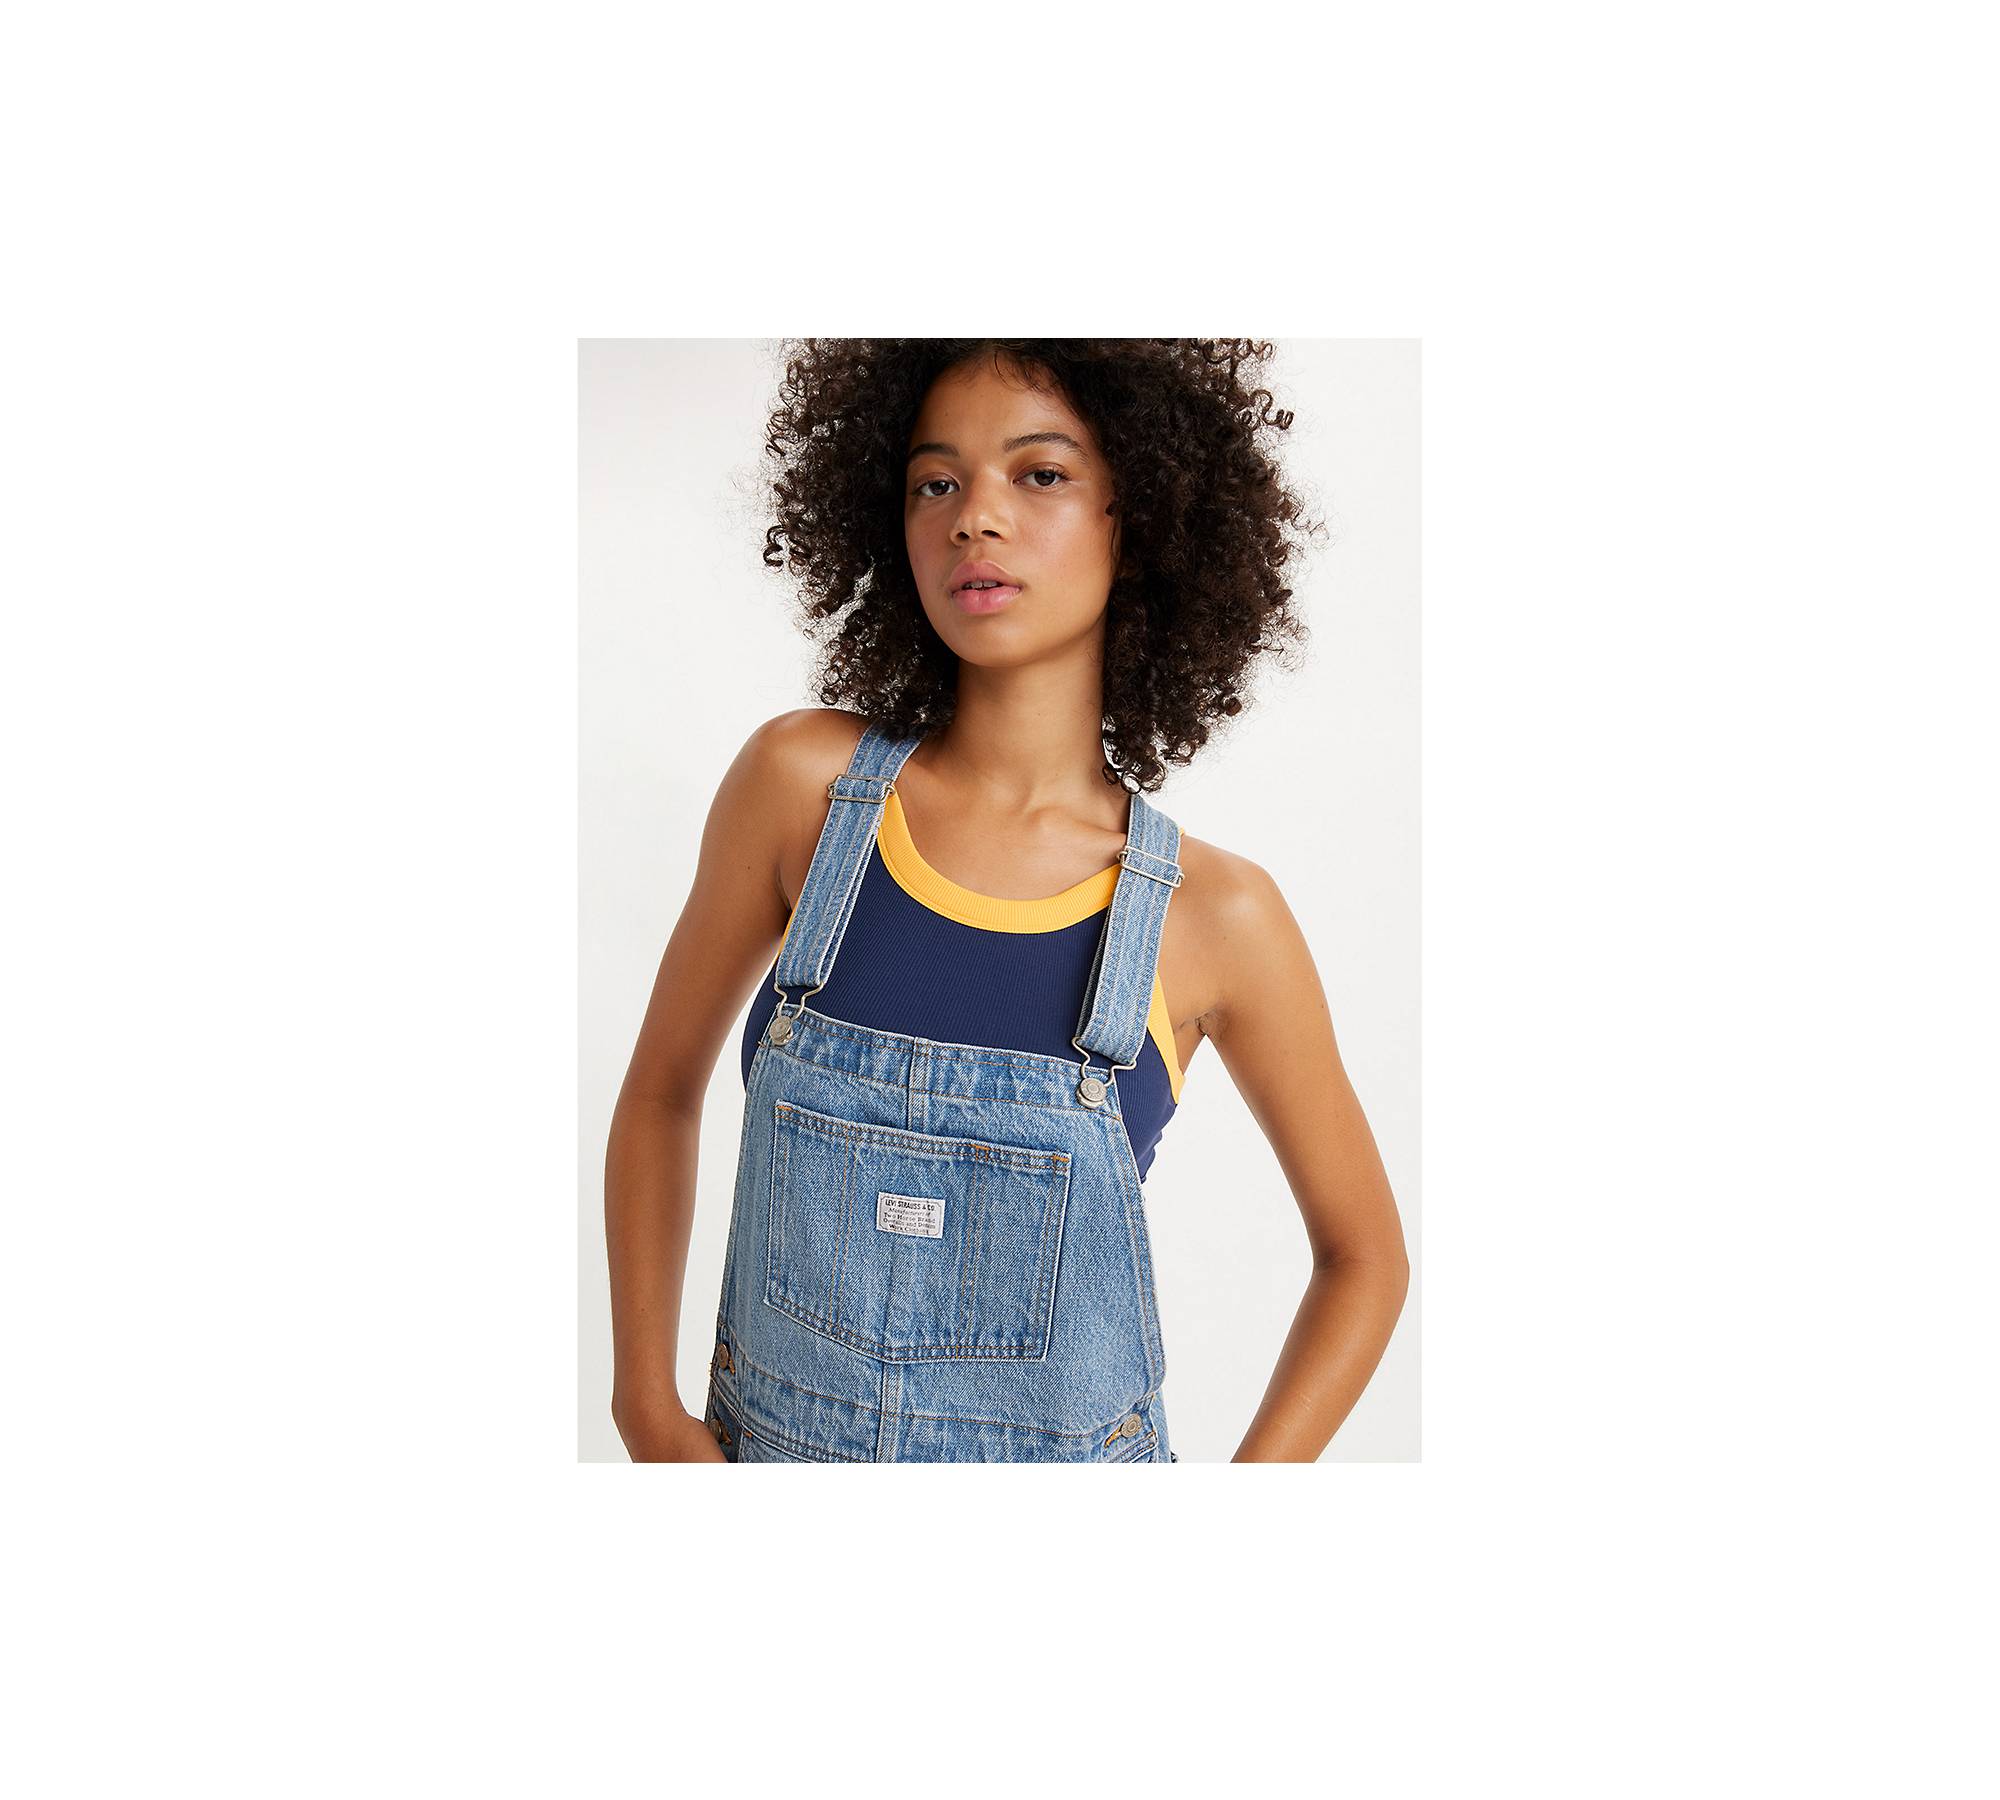 Levi's Two Horse Brand Overalls